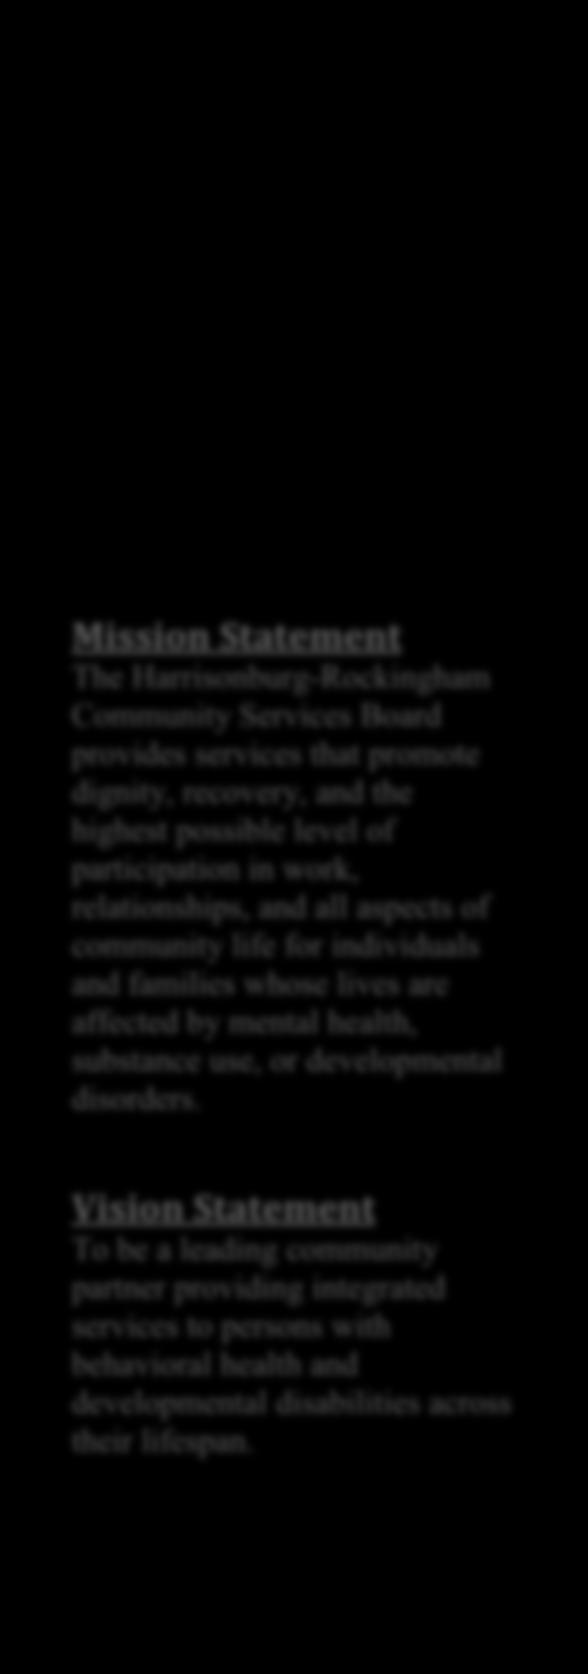 Vision Statement To be a leading community partner providing integrated services to persons with behavioral health and developmental disabilities across their lifespan.